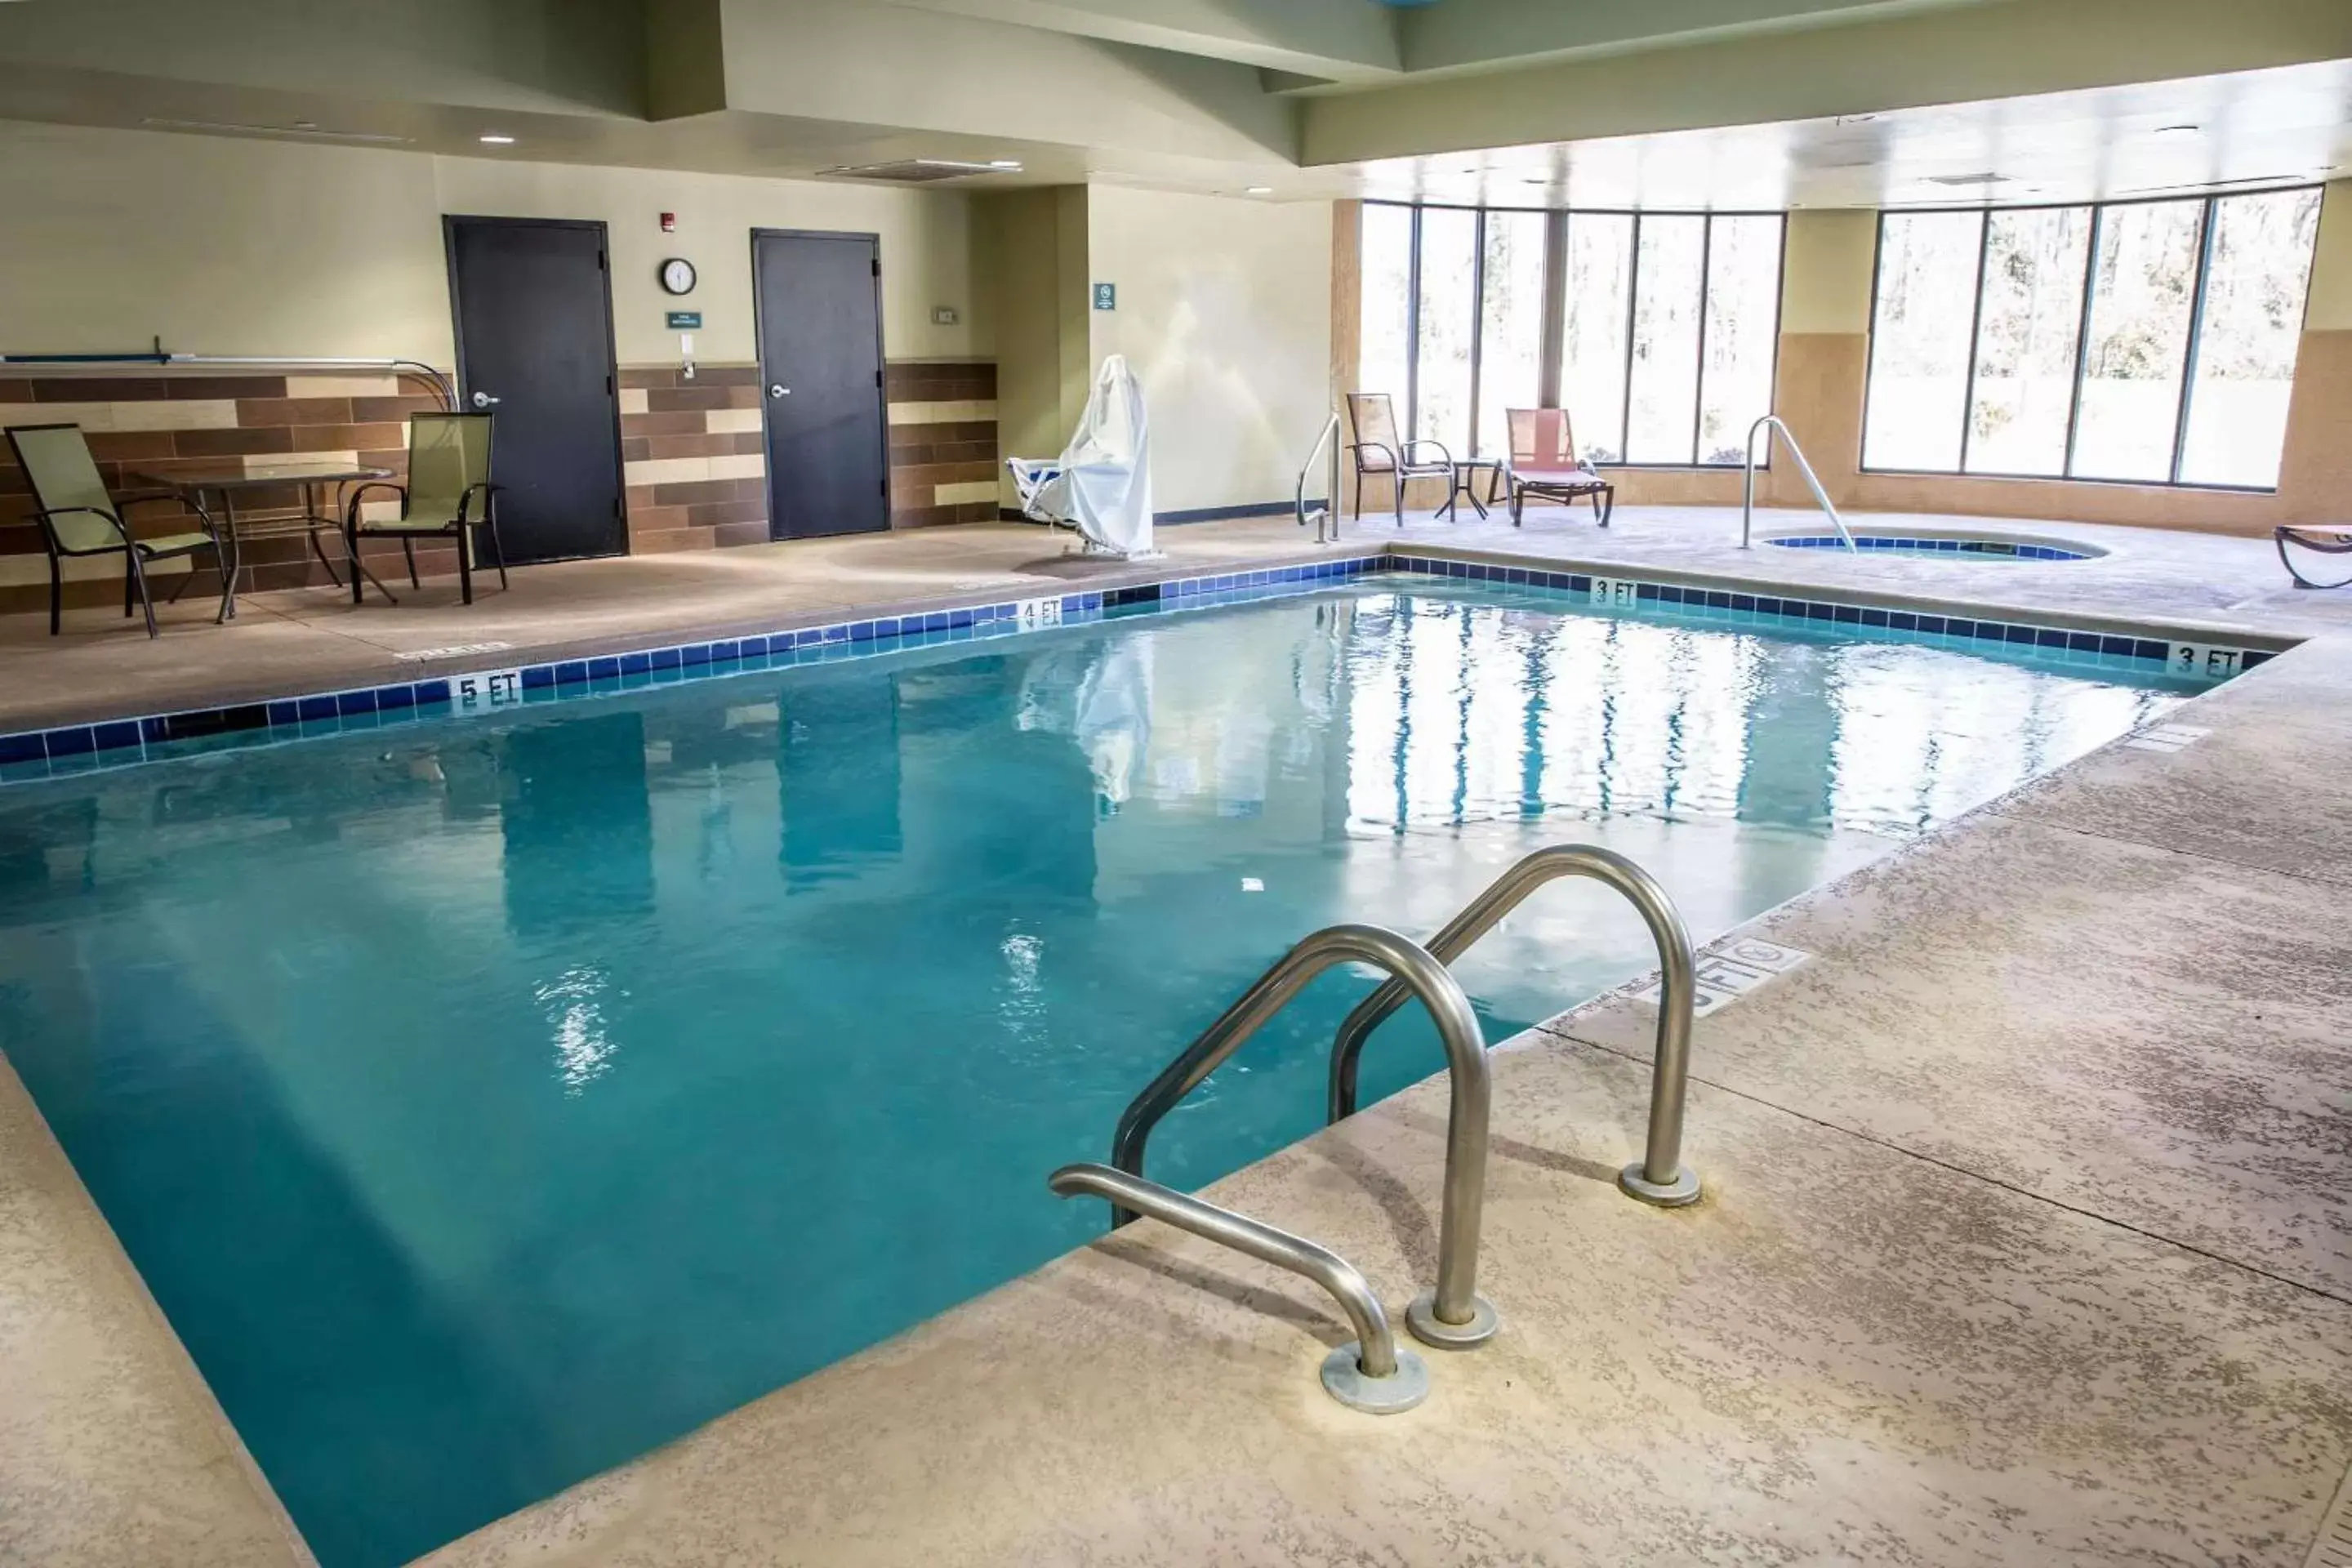 On site, Swimming Pool in Comfort Suites New Bern near Cherry Point